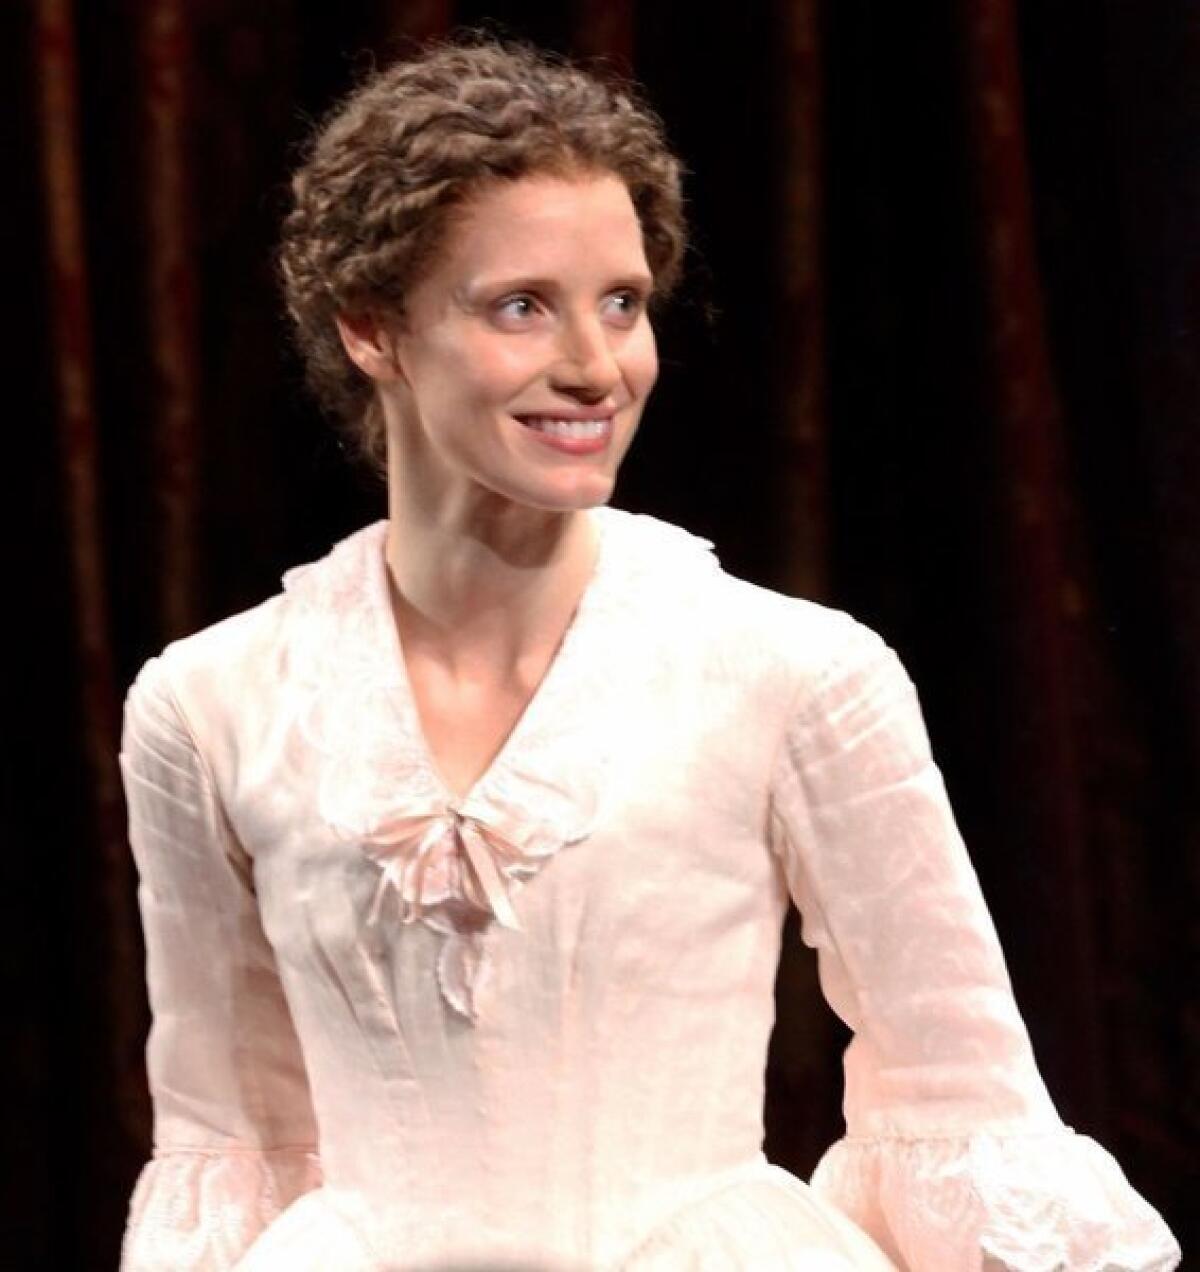 Jessica Chastain made her Broadway debut in Ruth and Augustus Goetz's oft-revived drama, "The Heiress."